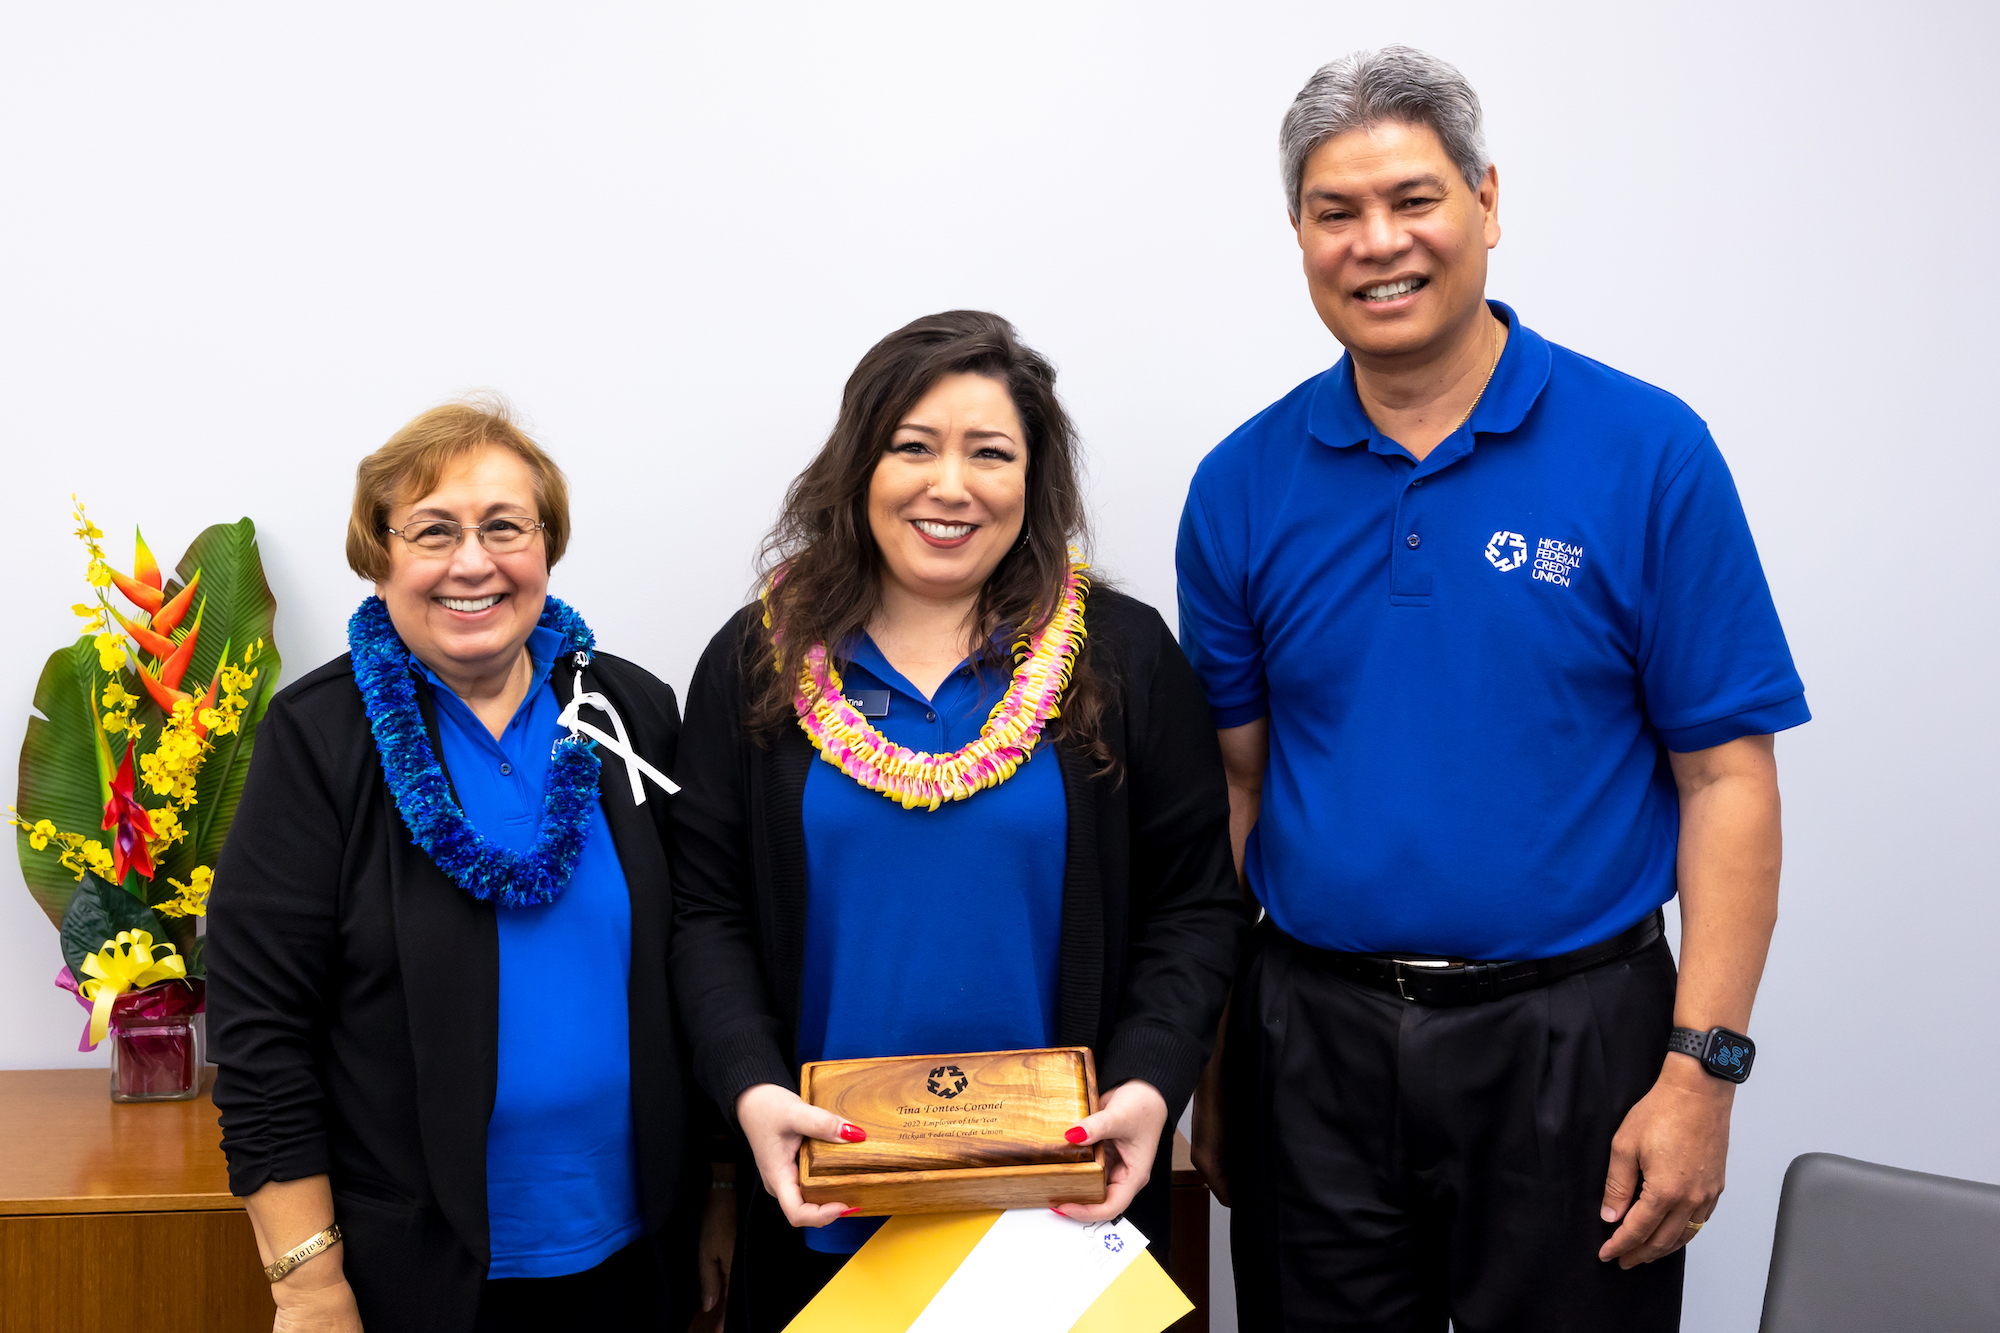 2022 Employee of the Year Tina poses with Hickam FCU Board Chair Carol Ebia and President/CEO Scott Kaulukukui